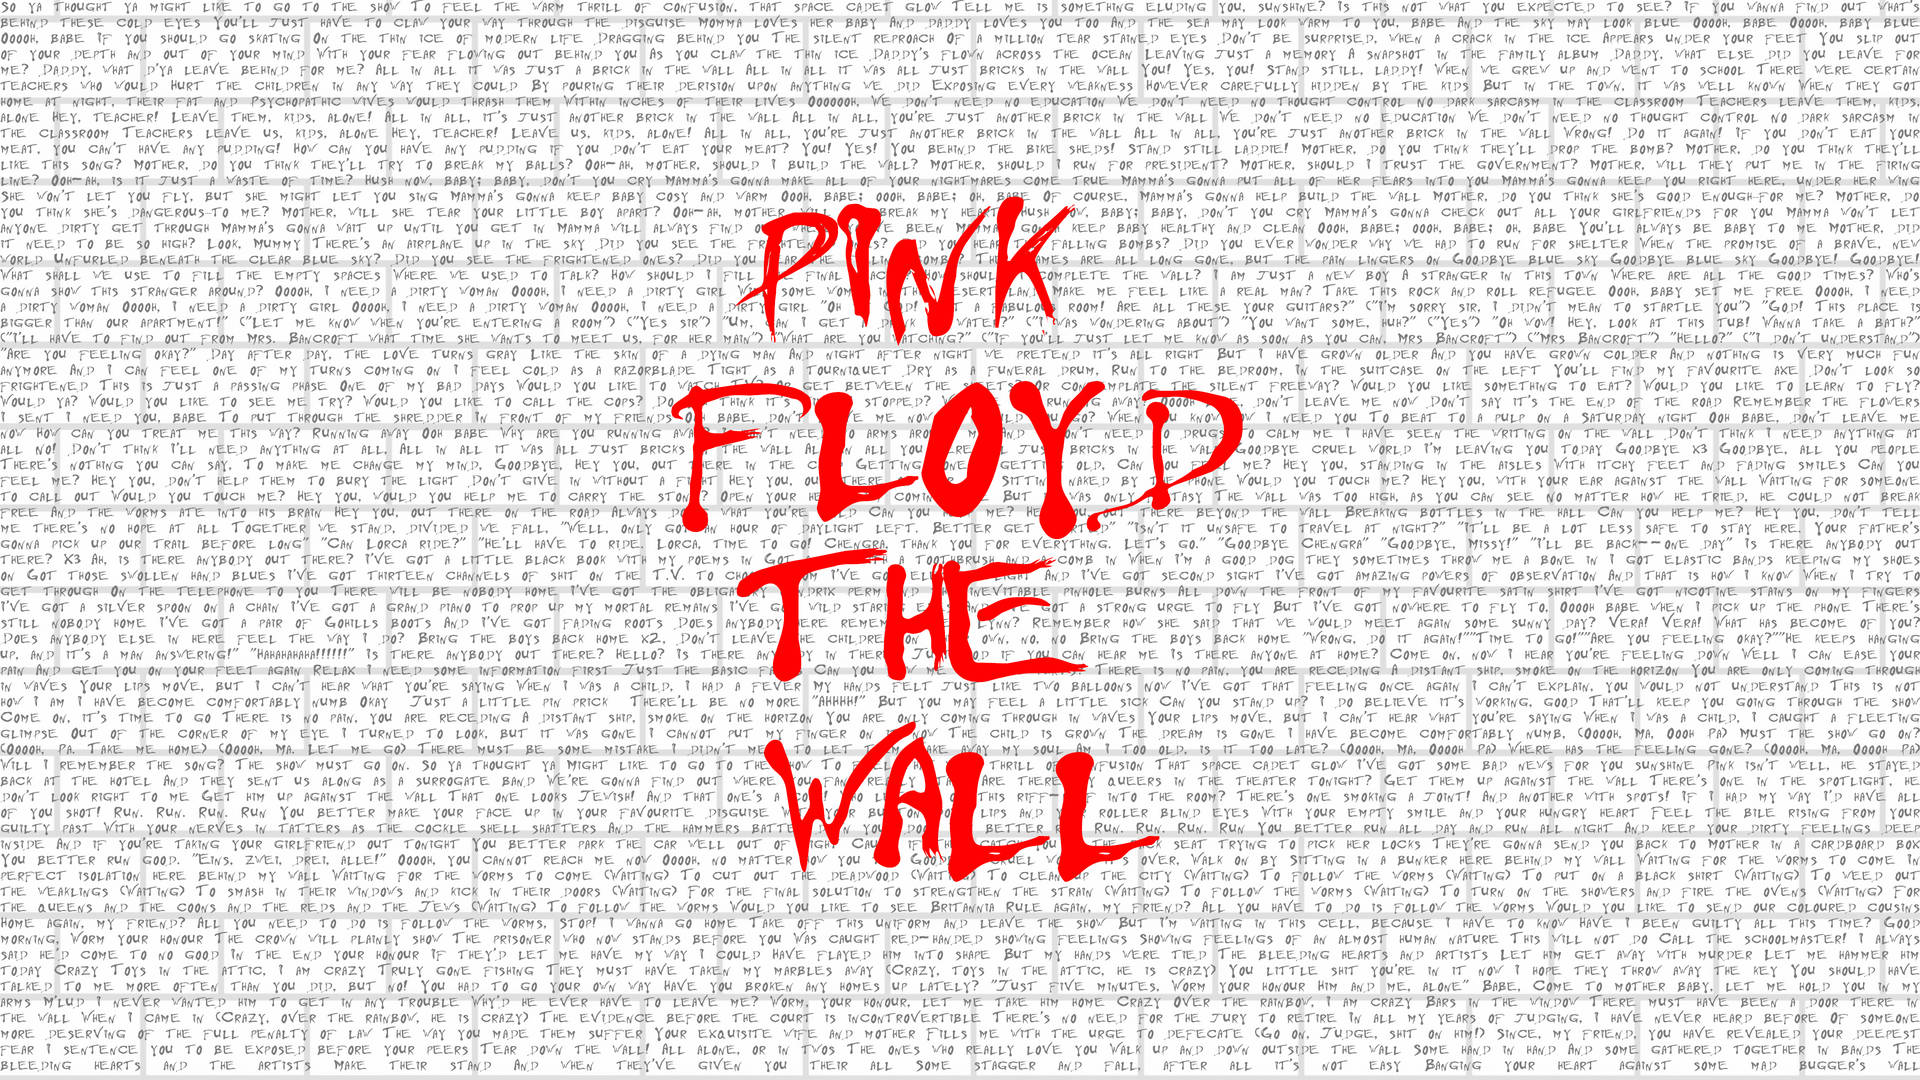 Pink Floyd The Wall Wallpaper